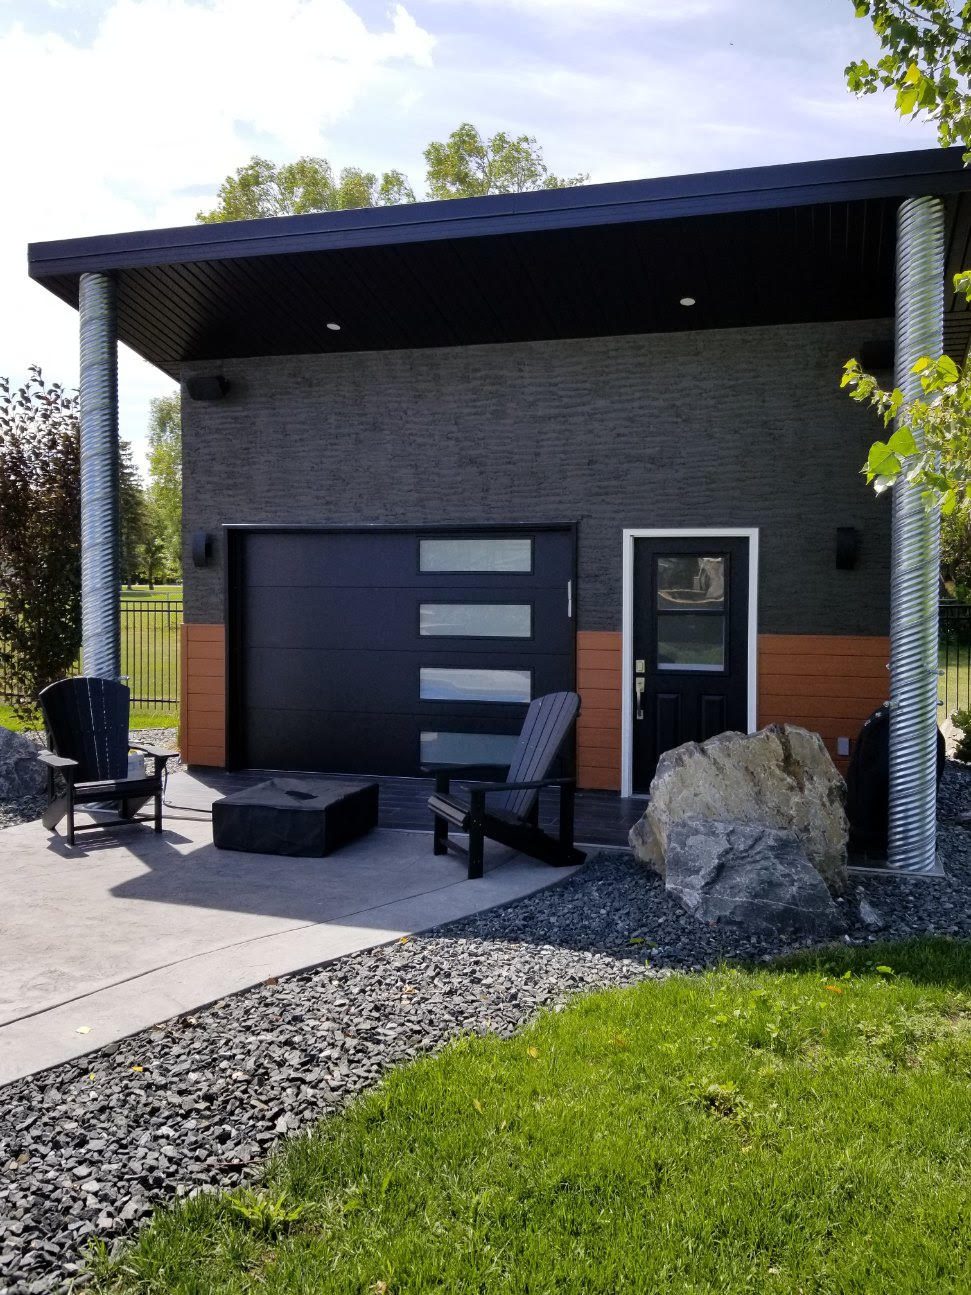 Faux wood and dark stucco outside seating area renovation